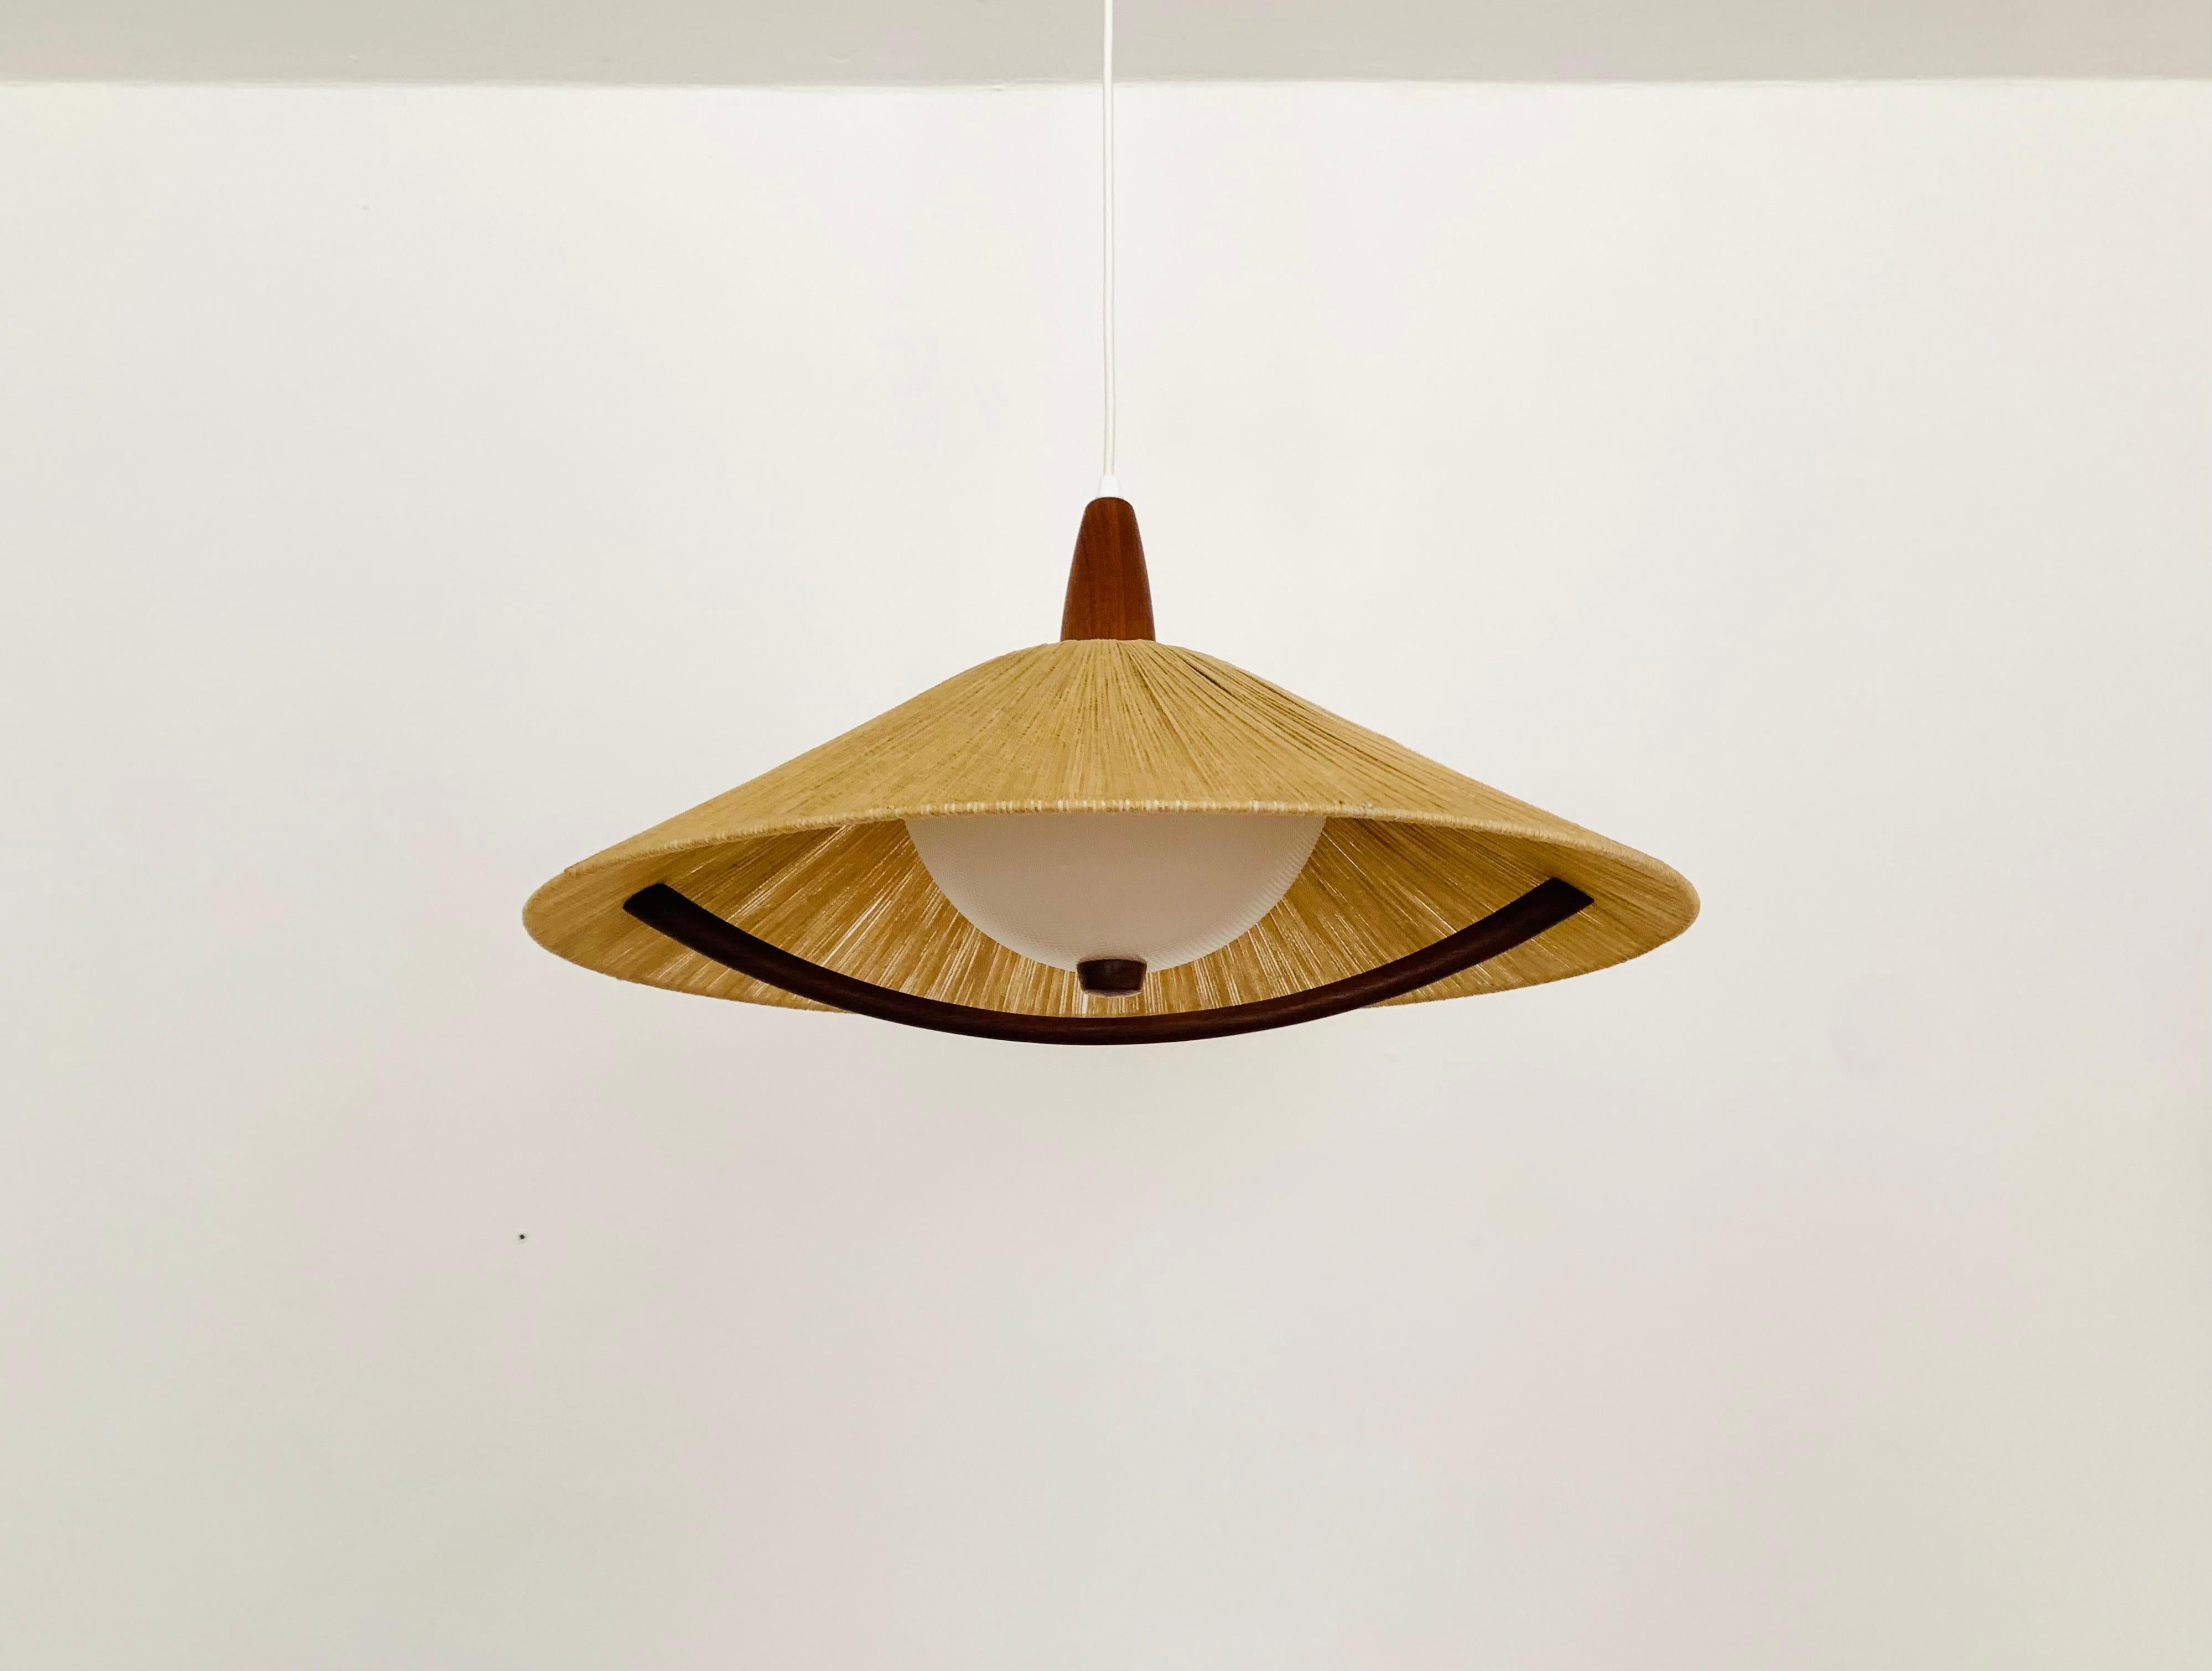 Exceptionally beautiful and large pendant light from the 1960s.
The design is very unusual.
The shape and the materials create a warm and very pleasant light.
The teak details are beautifully shaped.

Condition:

Very good vintage condition with